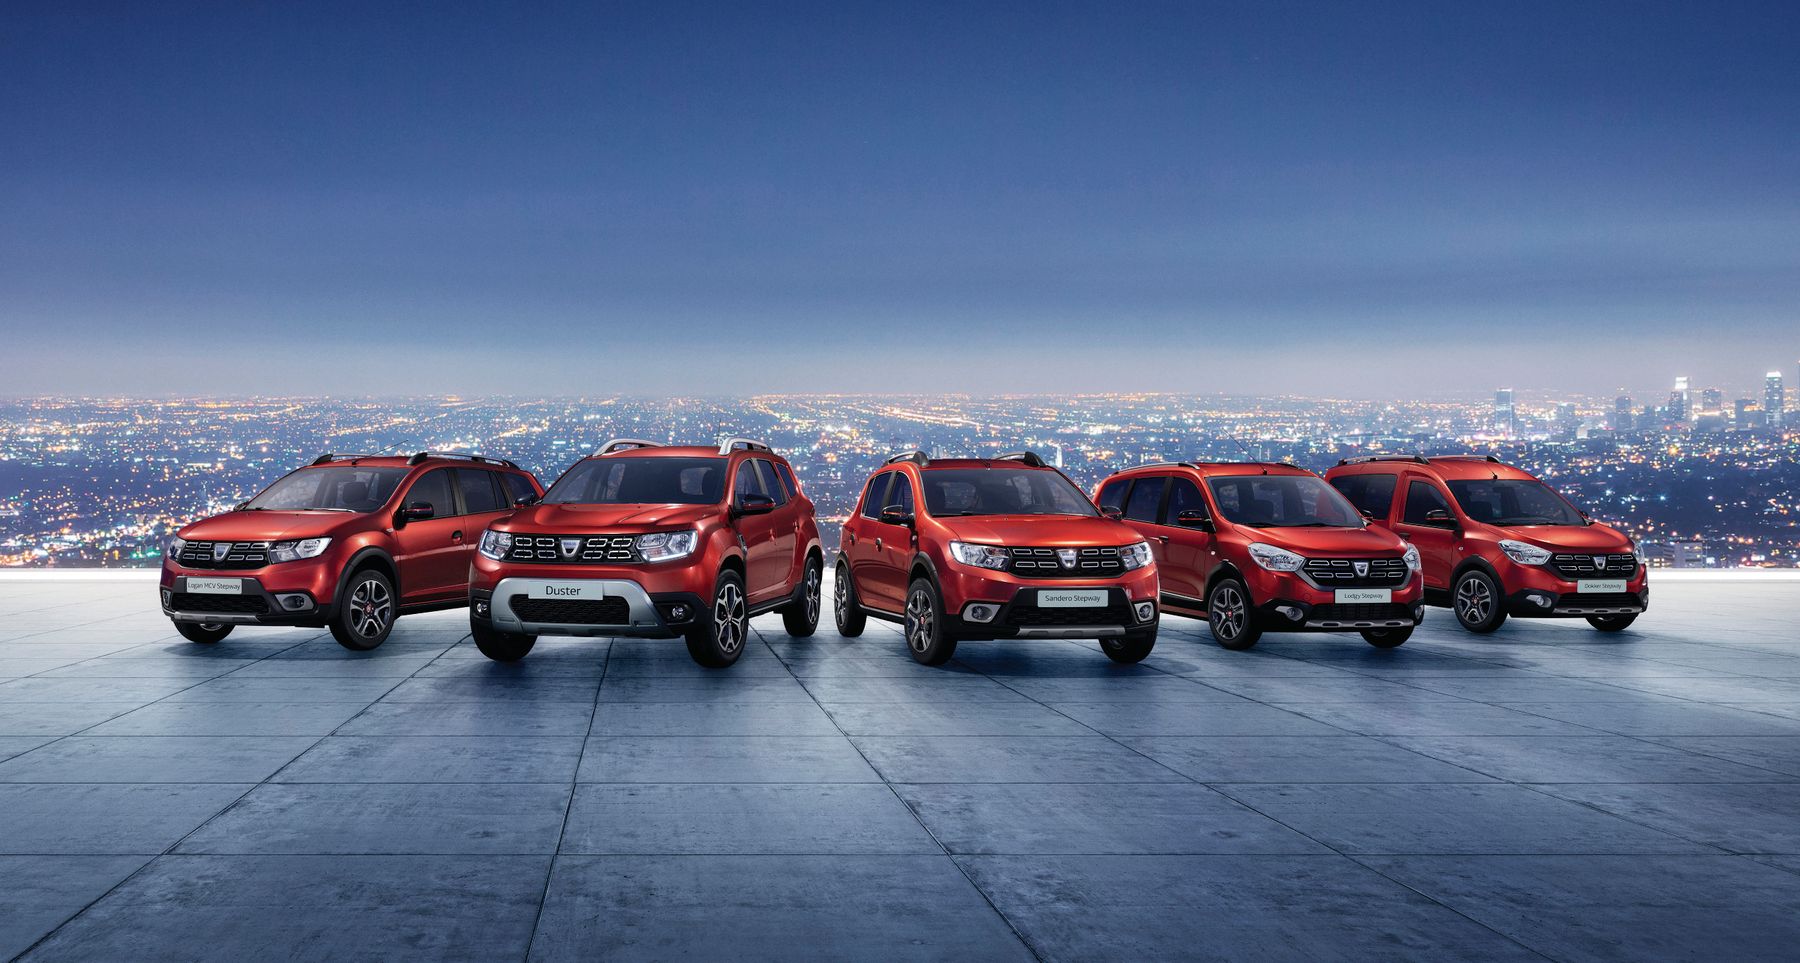 Facelifted Dacia Dokker And Lodgy Bring More Optional Features